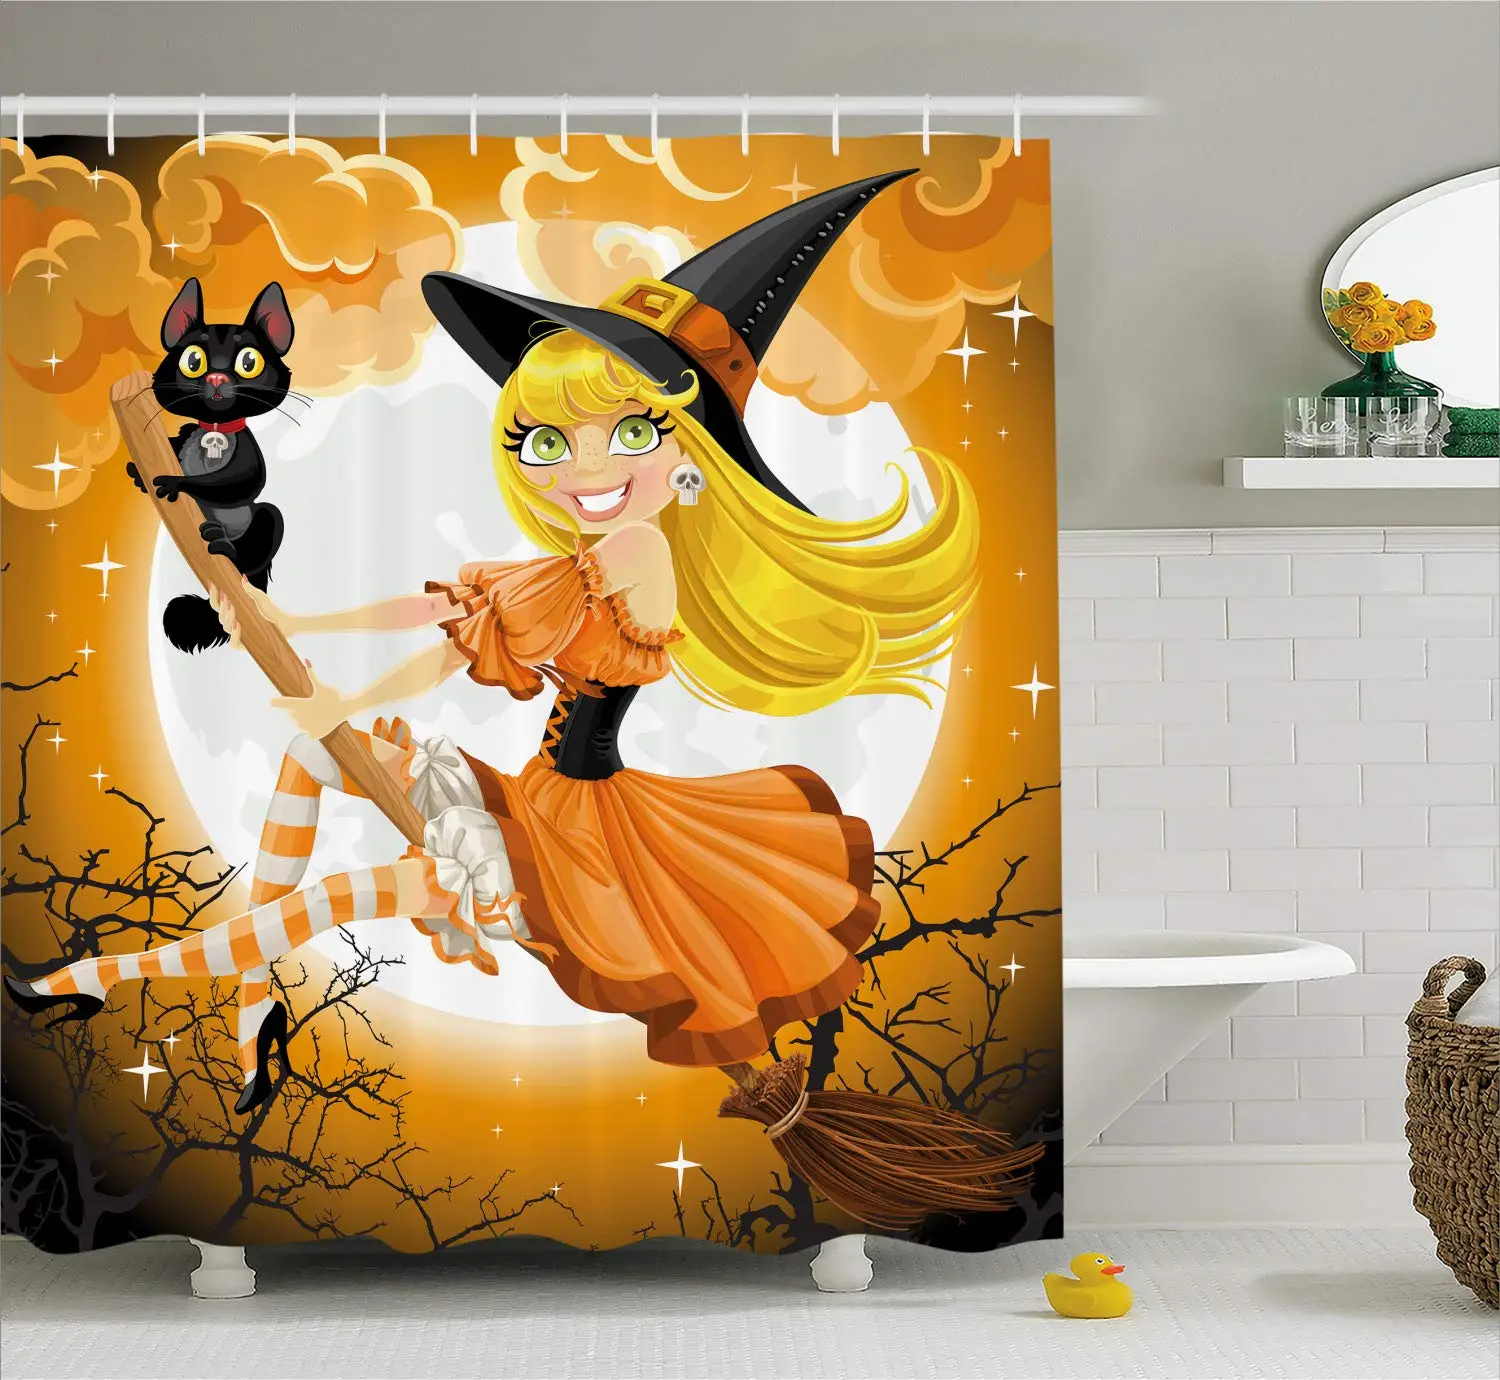 

Halloween Shower Curtain with Trick or Treat Carton Little Girl Witch with Hat,Cat,Moon, Art Print Cloth Fabric Bathroom